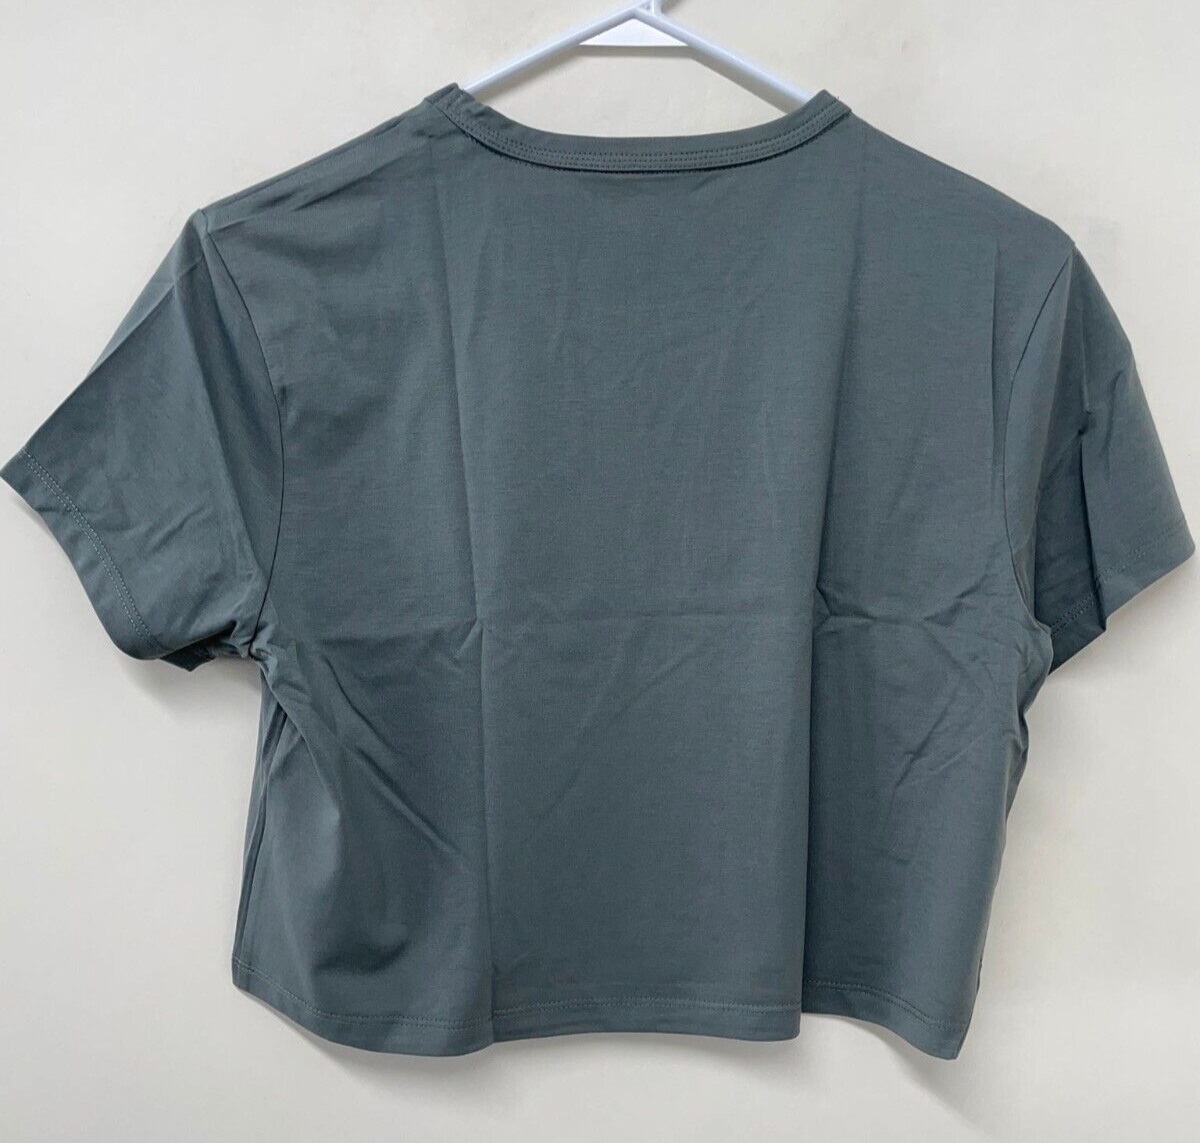 Cuts Women's S Almost Friday Tee Cropped Sage Classic Crew Top Shirt WT10205N